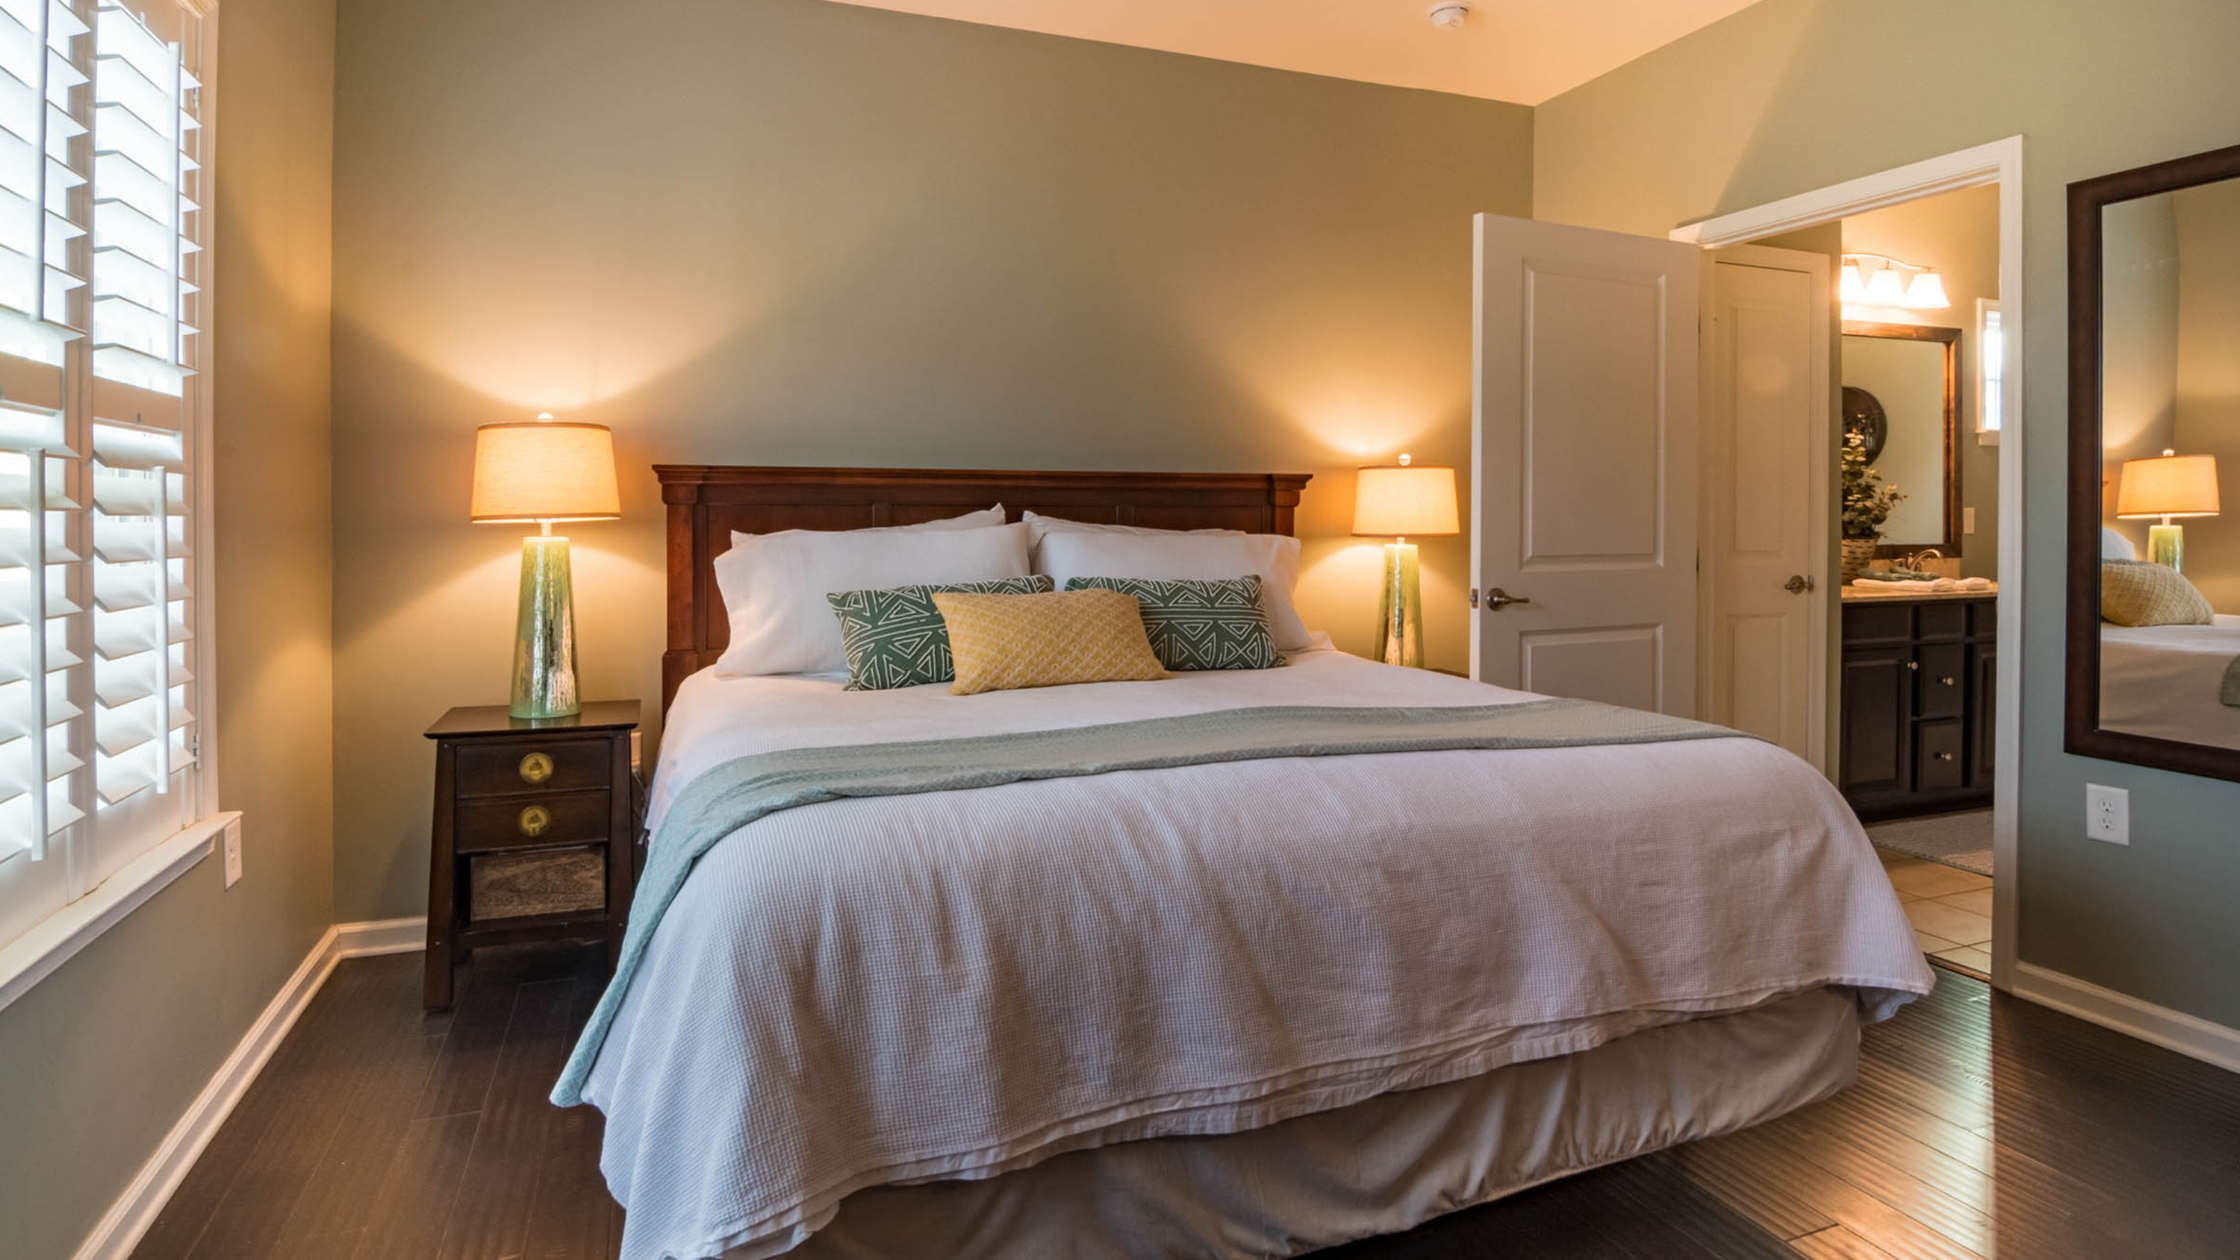 Read more about the article Selling Your Home? Here’s What Not to Do When Staging Your Bedroom